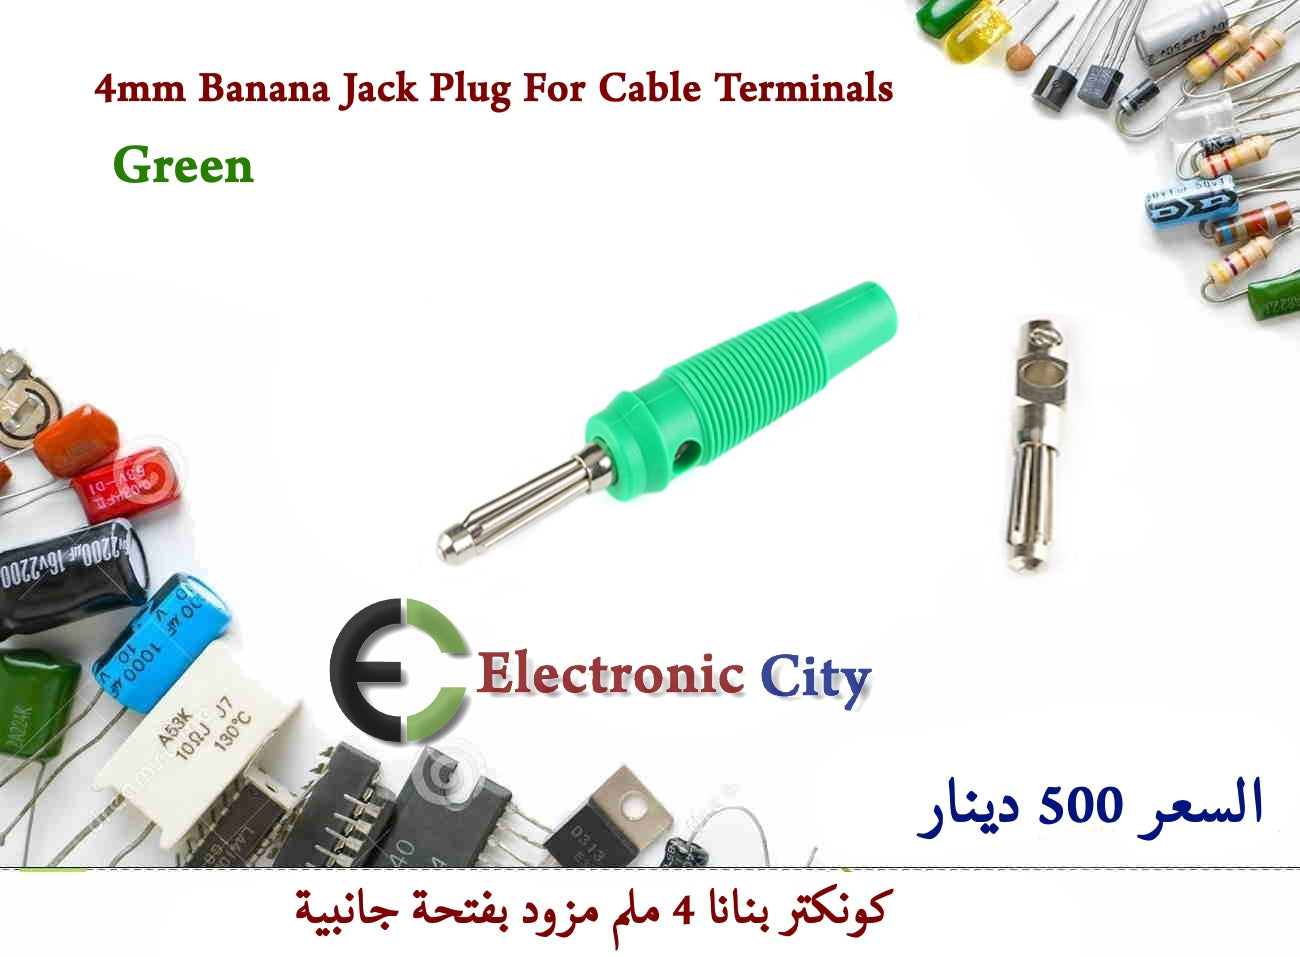 4mm Banana Jack Plug For Cable Terminals Green